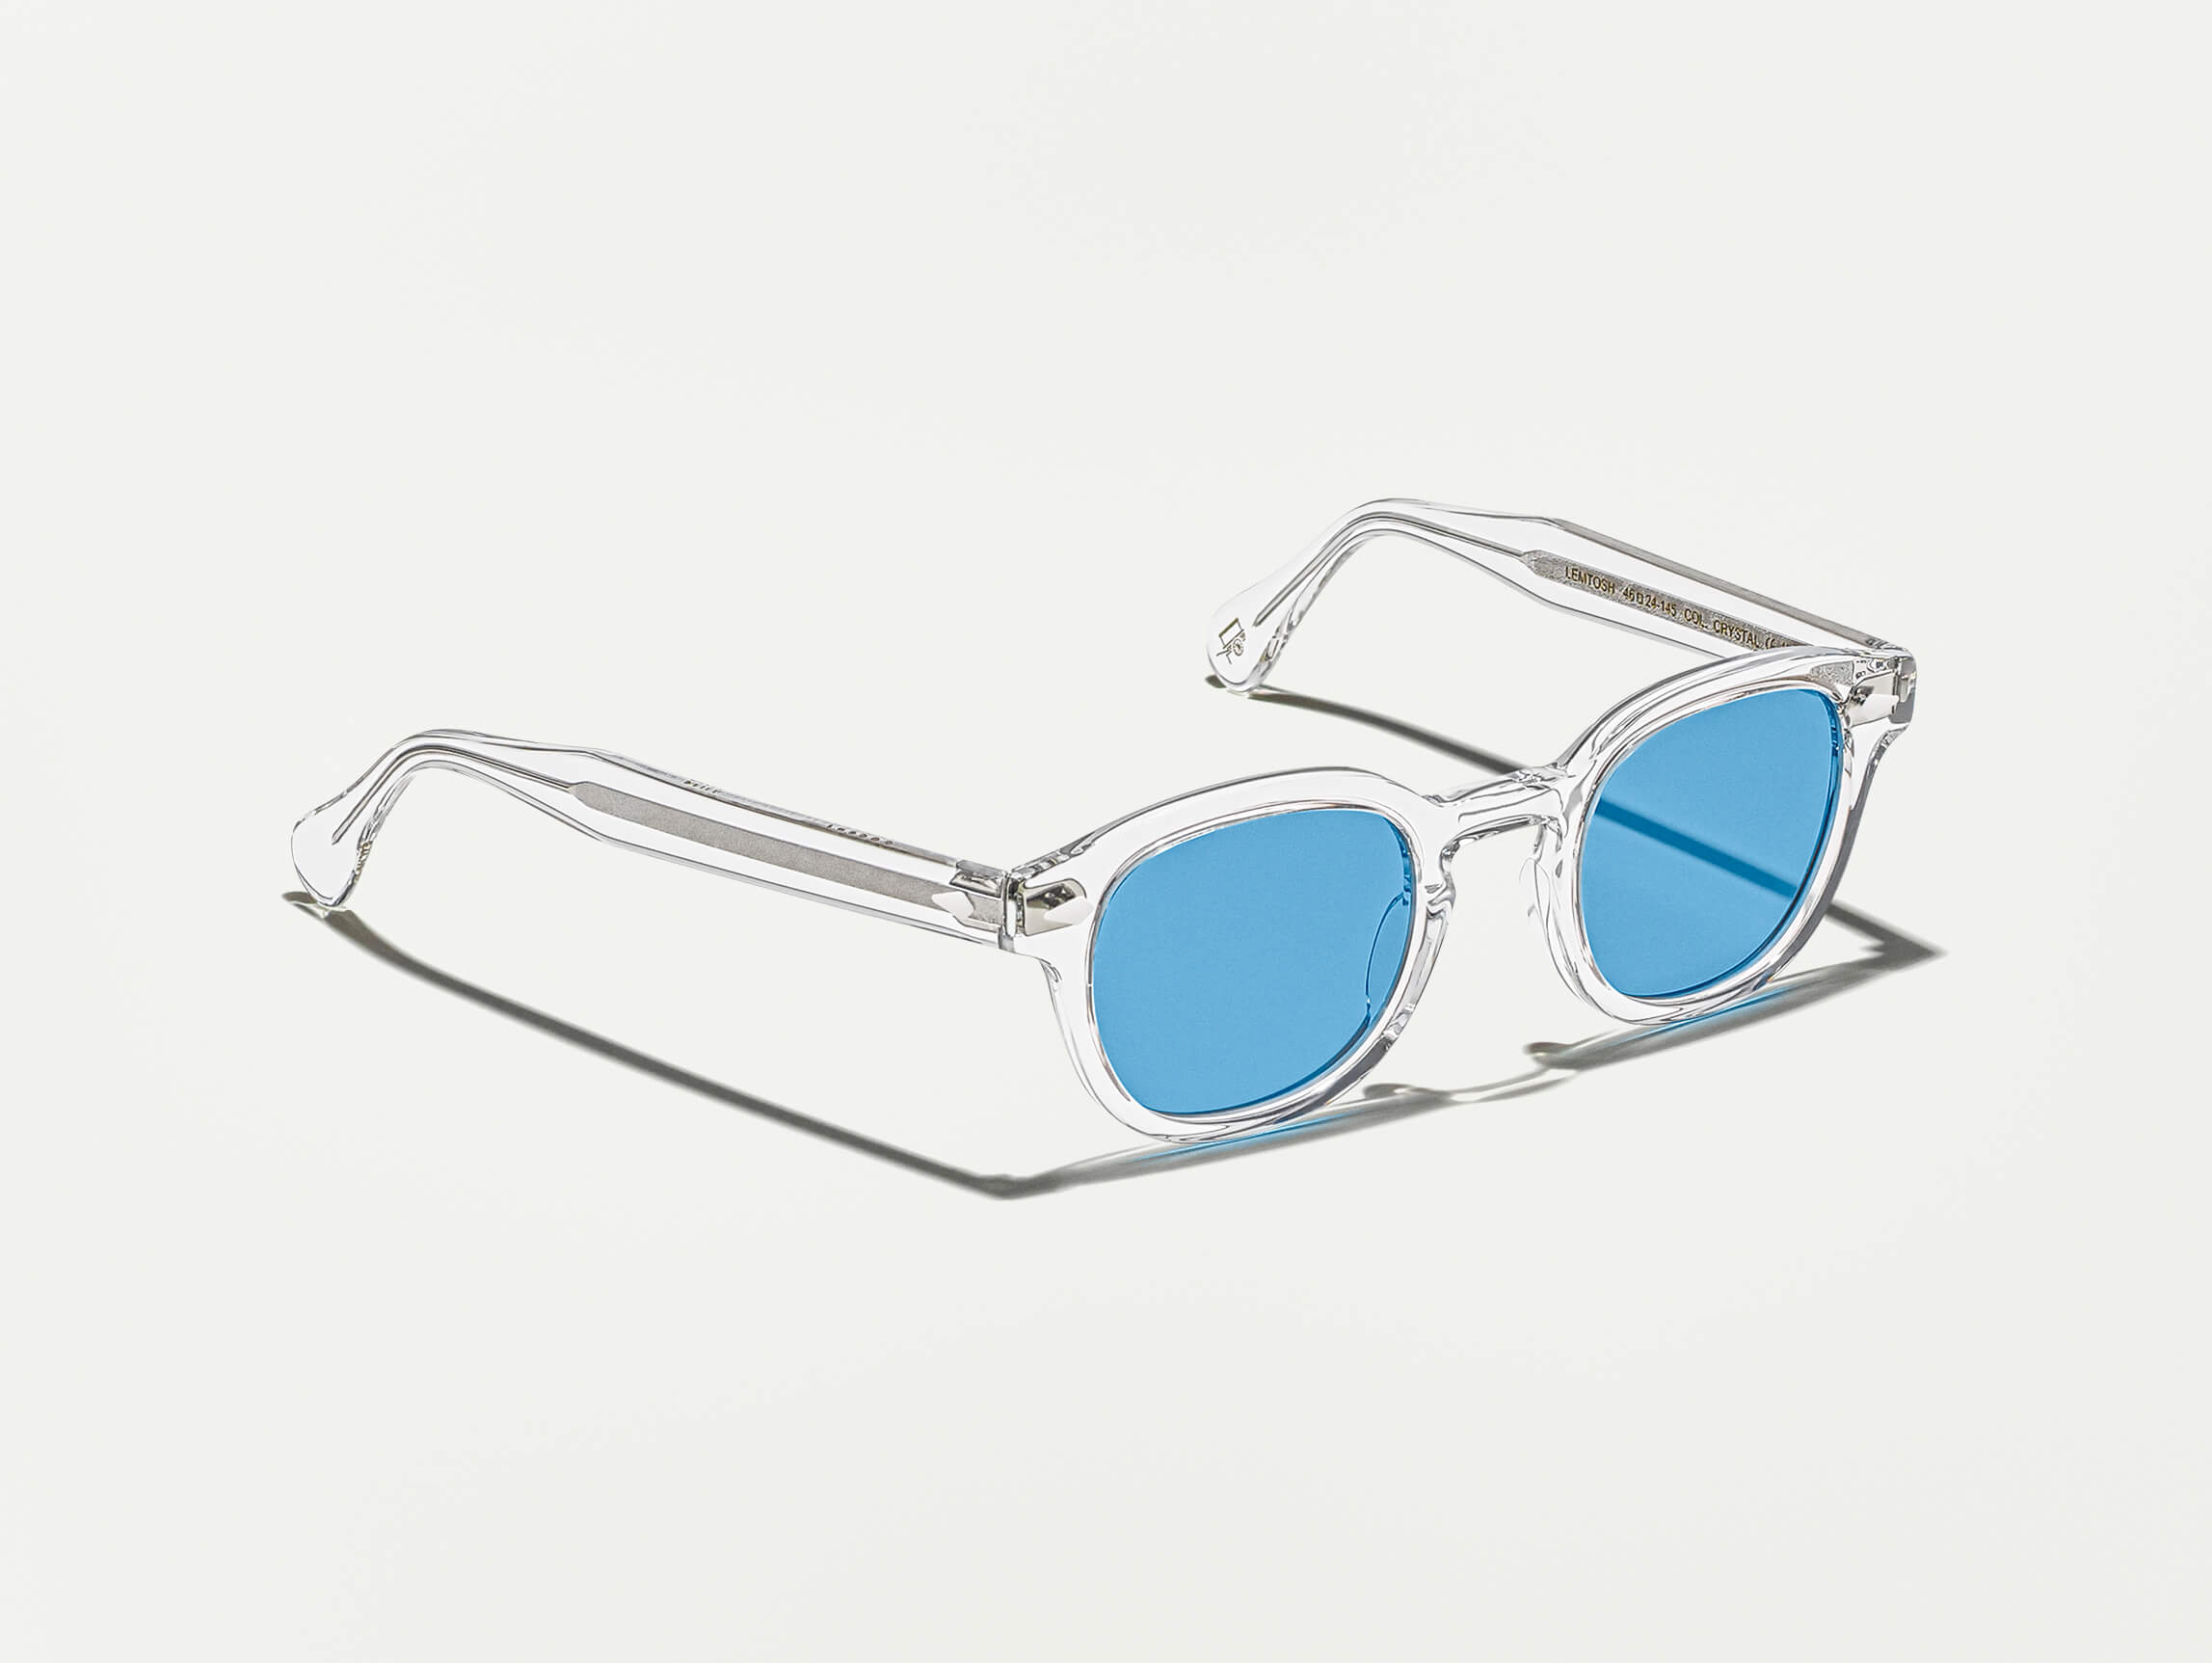 The LEMTOSH Crystal with Celebrity Blue Tinted Lenses